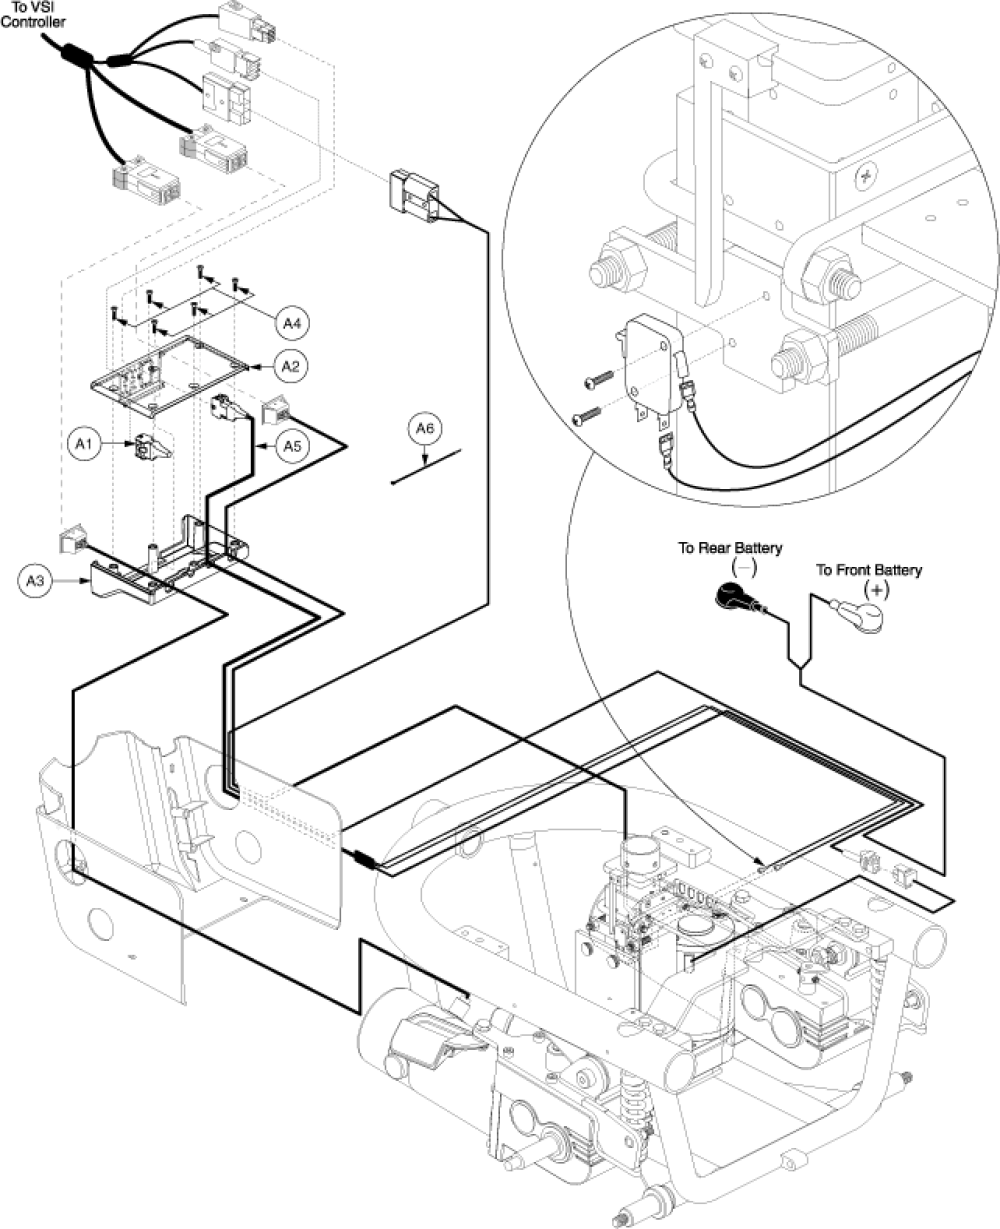 Electronics Assembly - Vsi, Power Seat Off-board parts diagram